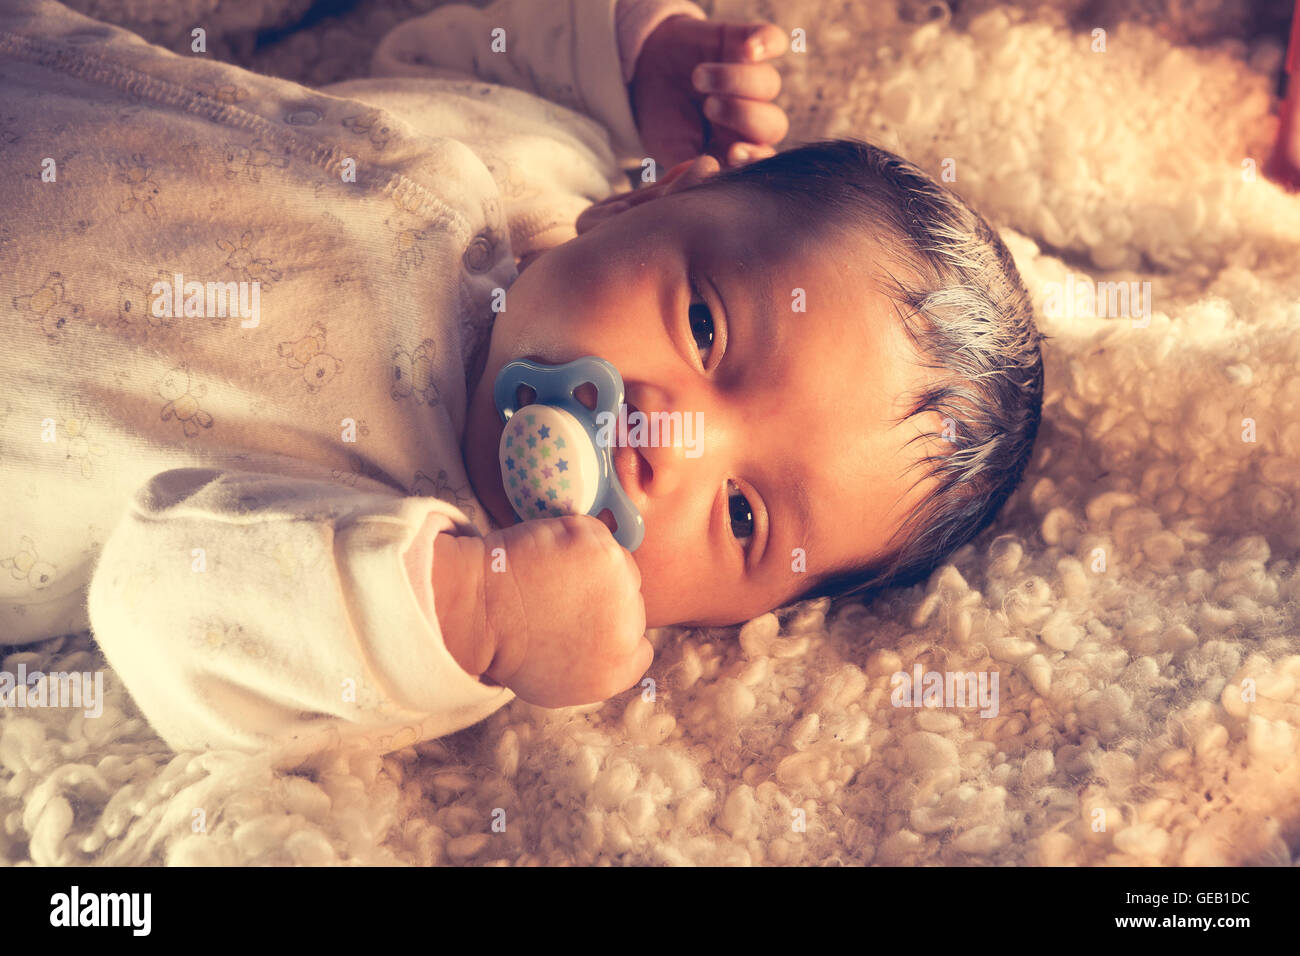 Afro european, baby just before falling asleep on a cozy white fur Stock Photo